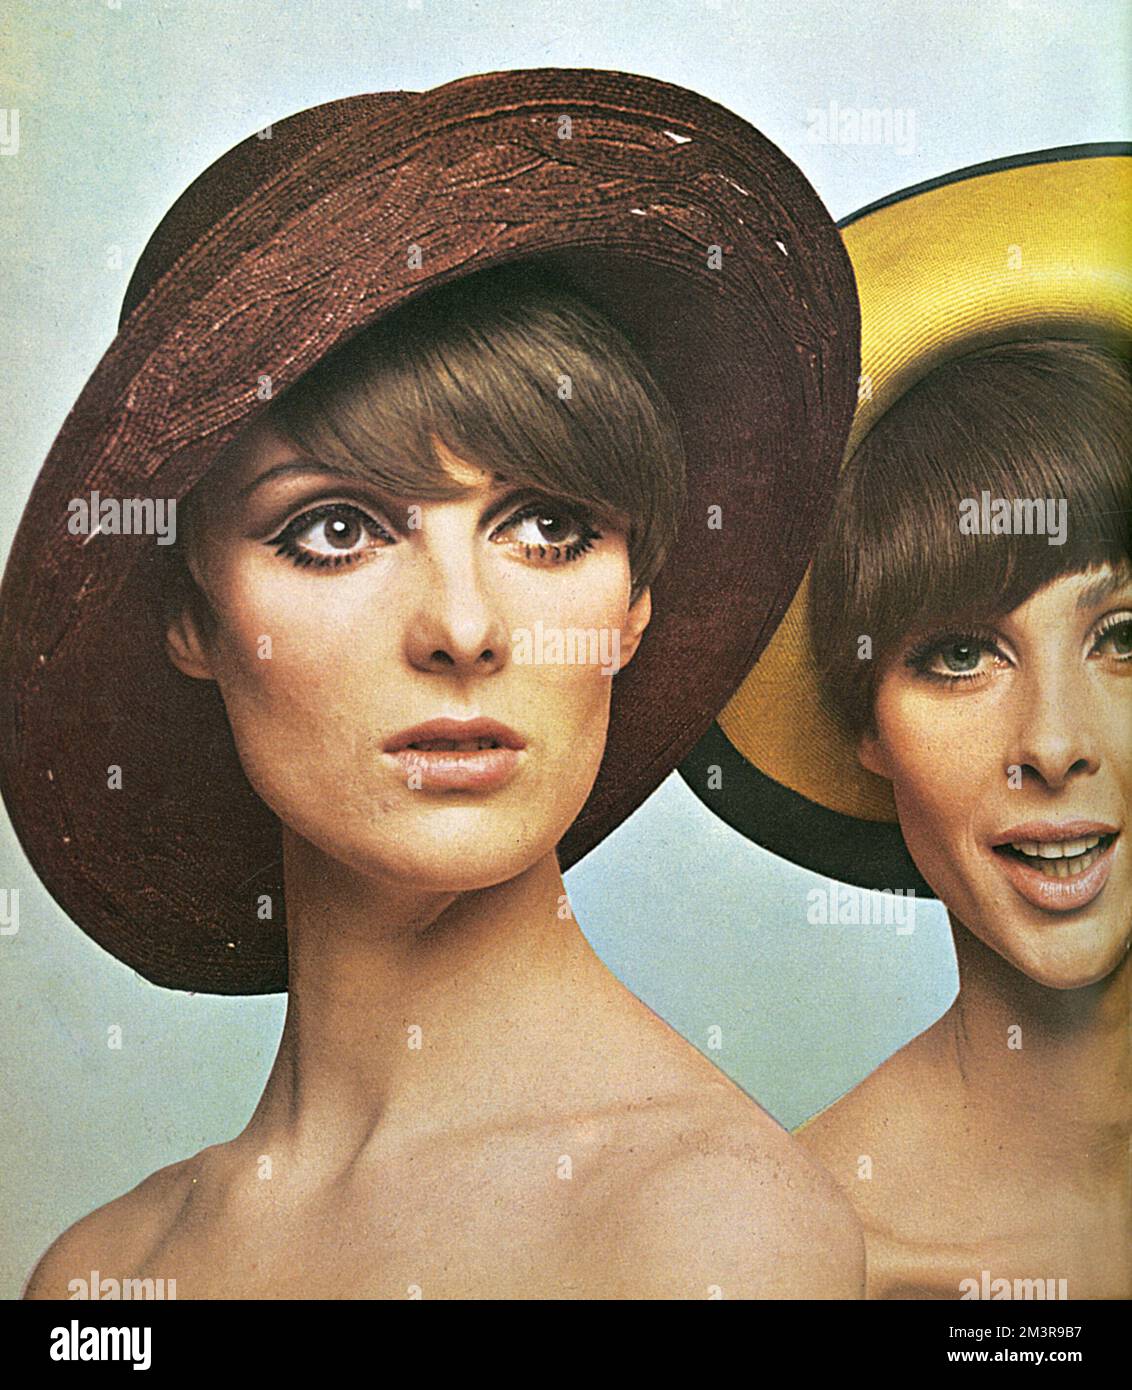 On the left: model wearing a plum straw hat with versatile brim by Otto Lucas Junior. To give her that natural, glowing look, they used the liquid film foundation &quot;Beige Rose&quot; and same shade powder (Ayer Pink No. 1) on cheeks, and &quot;Beige Gazelle&quot; lipstick. For the eyes, black eyeliner used with Super Long mascara, brown eyebrow pencil and &quot;Pearly Beige&quot; eyeshadow.  On the right: model wearing a yellow straw hat with upturned brim banded in navy by Chez Elle. Worn with make-up by Max Factor. The foundation is Sheer Genius &quot;Tempting Touch&quot; under &quot;Tran Stock Photo